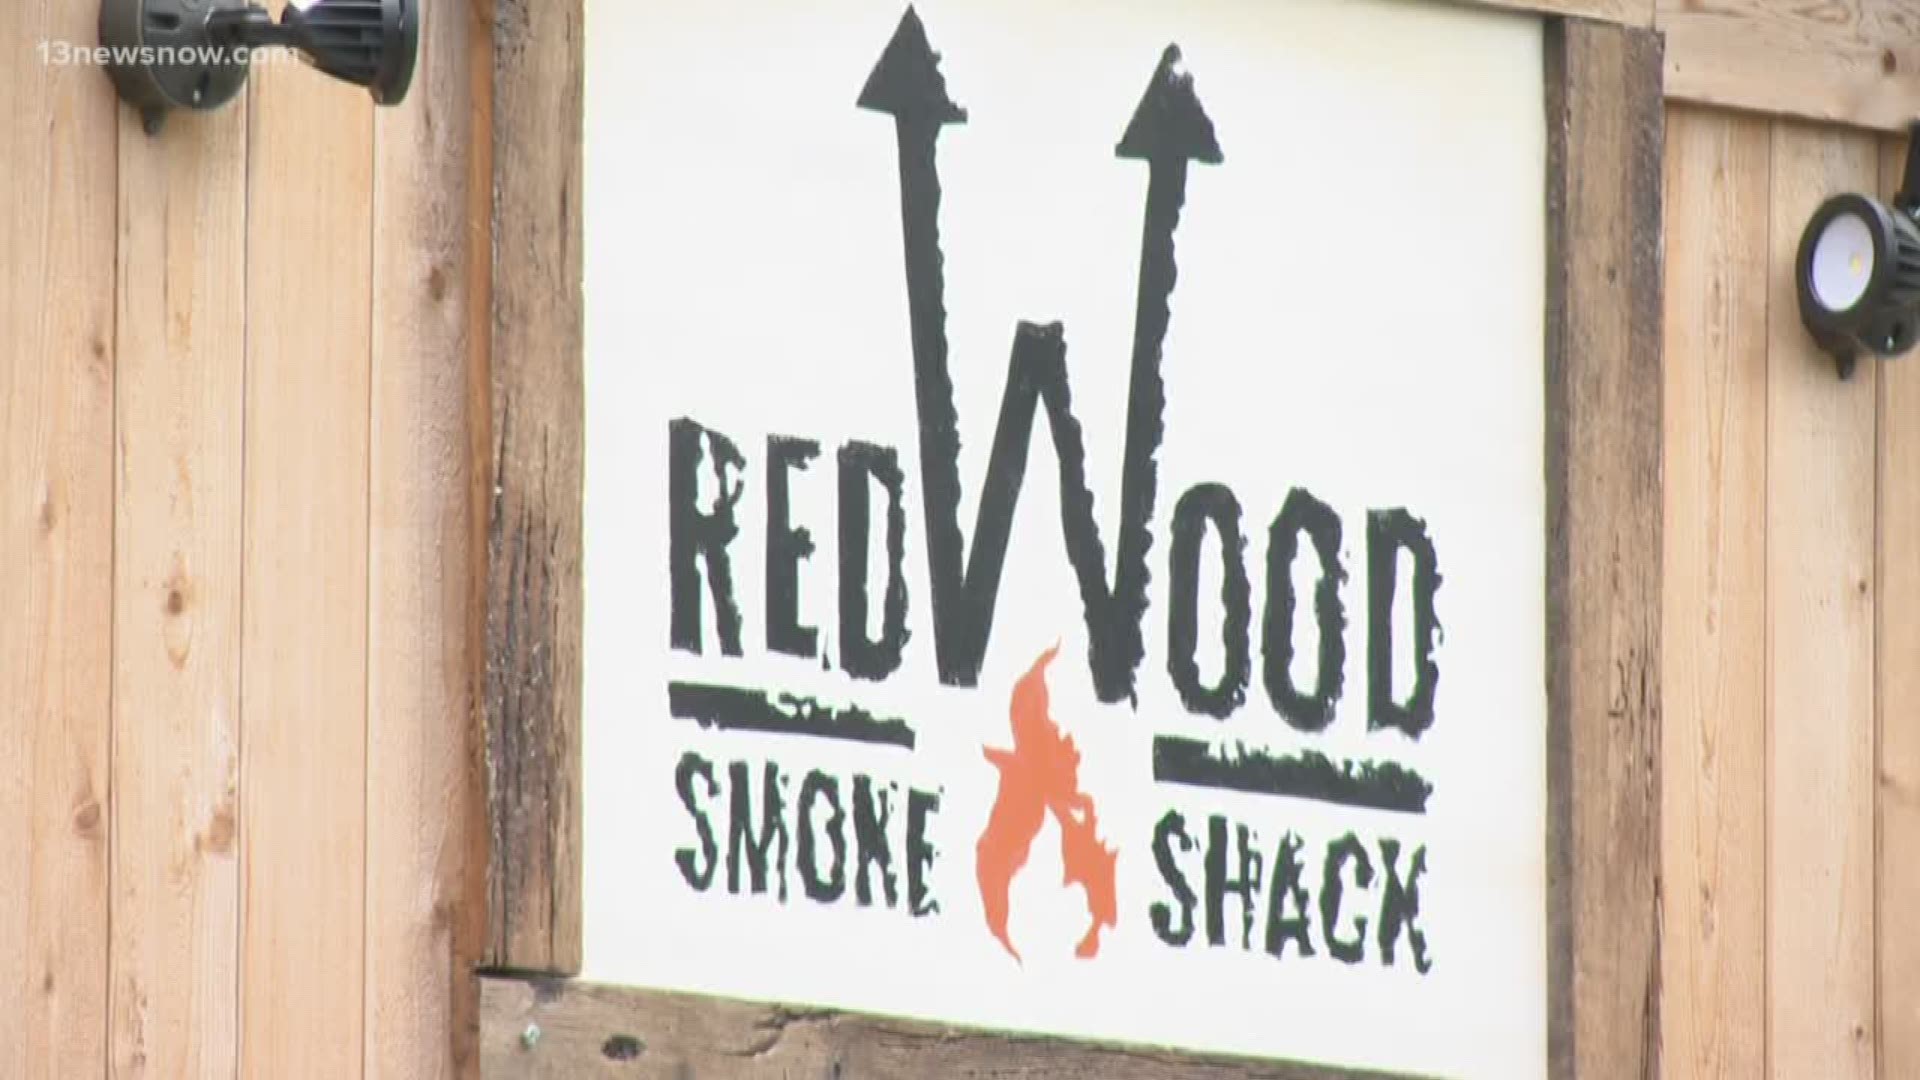 Redwood Smoke Shack is a popular food truck, but they had a soft opening at their brick-and-mortar location where the Dog-N-Burger Grille used to be.